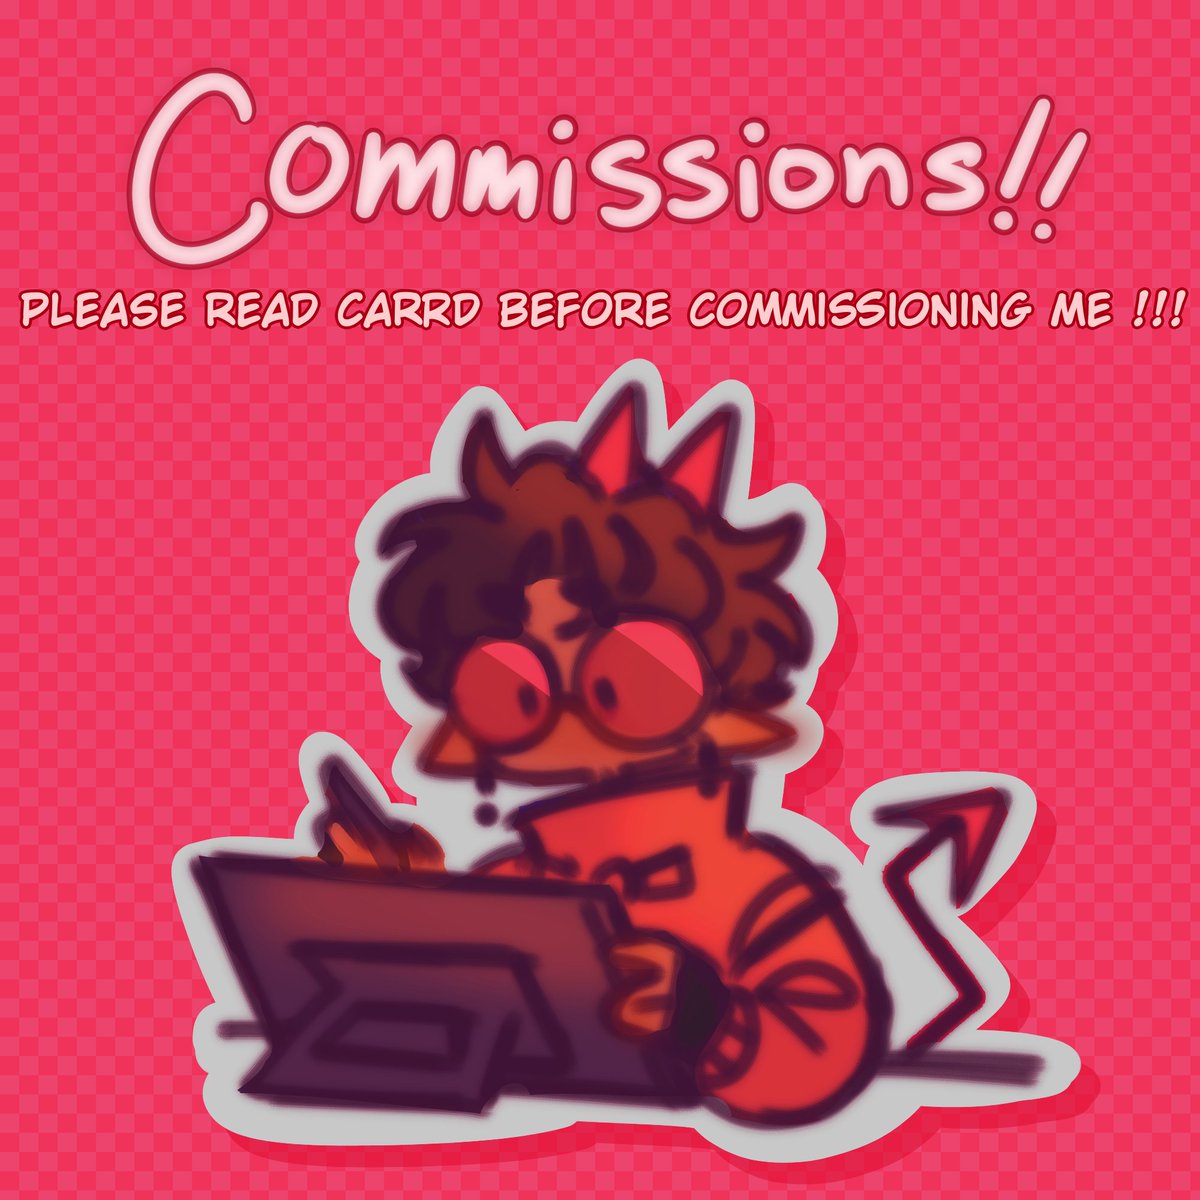 hey guys !! after so long i finally decided to officially open up commissions !! :D here's my carrd for tos and prices !! : cinnamacaron-comms.carrd.co/# rts are very appreciated !!!